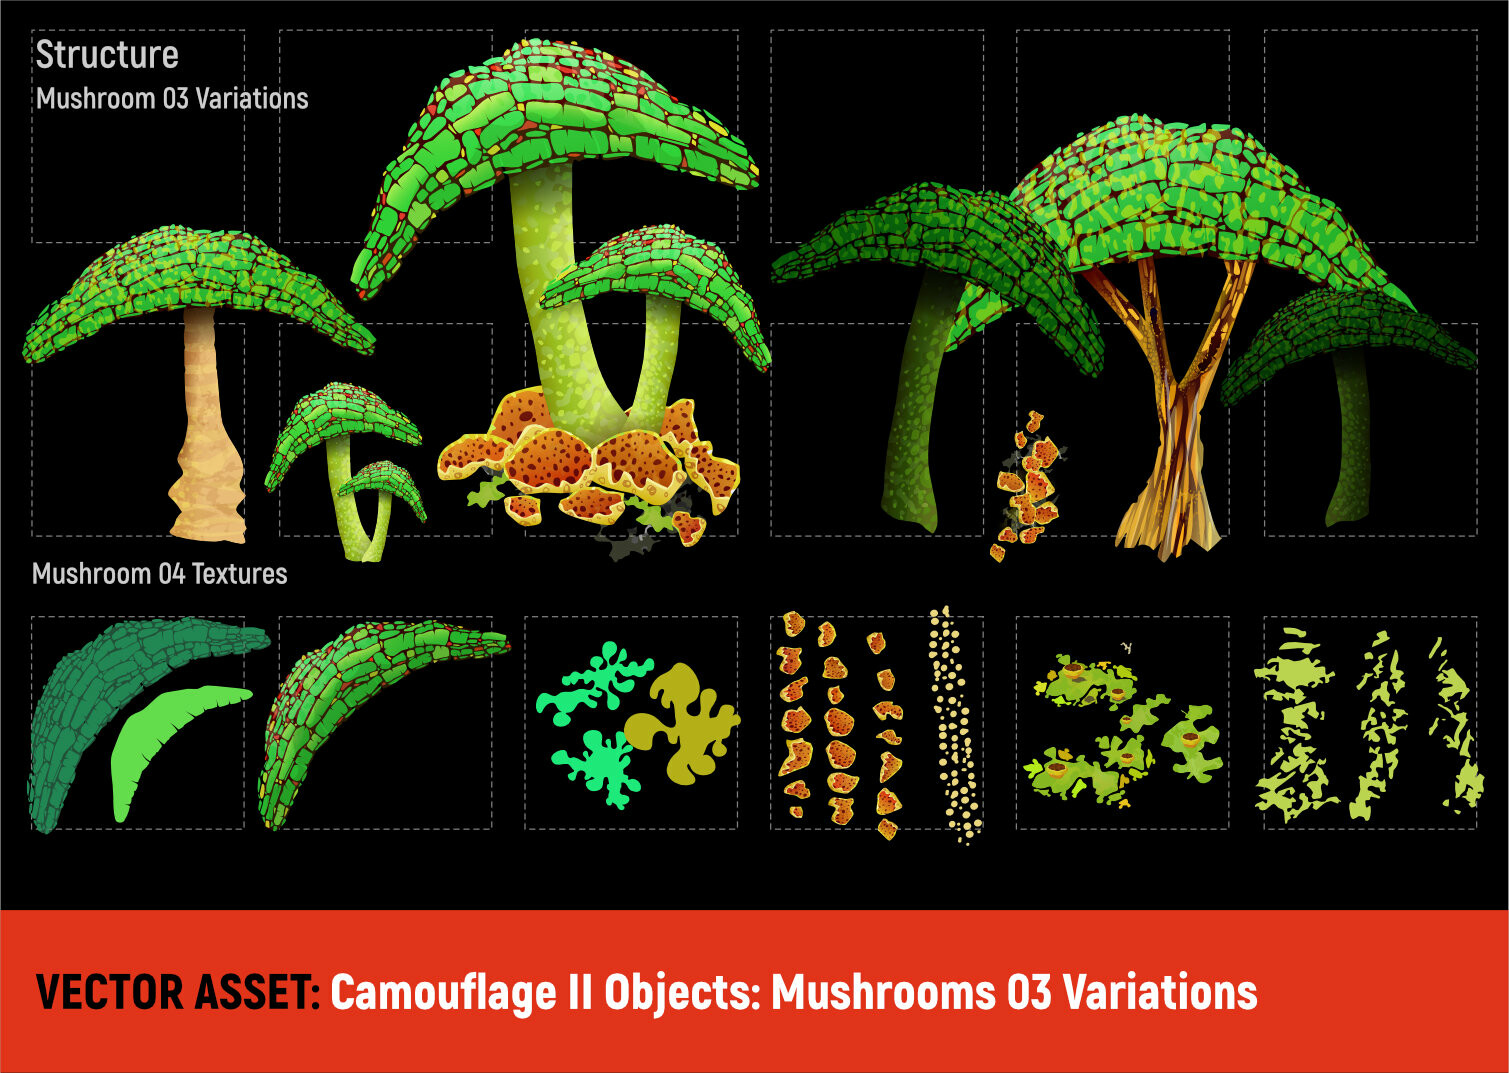 Vector Assets: Camouflage 2
Mushrooms 03 Variations